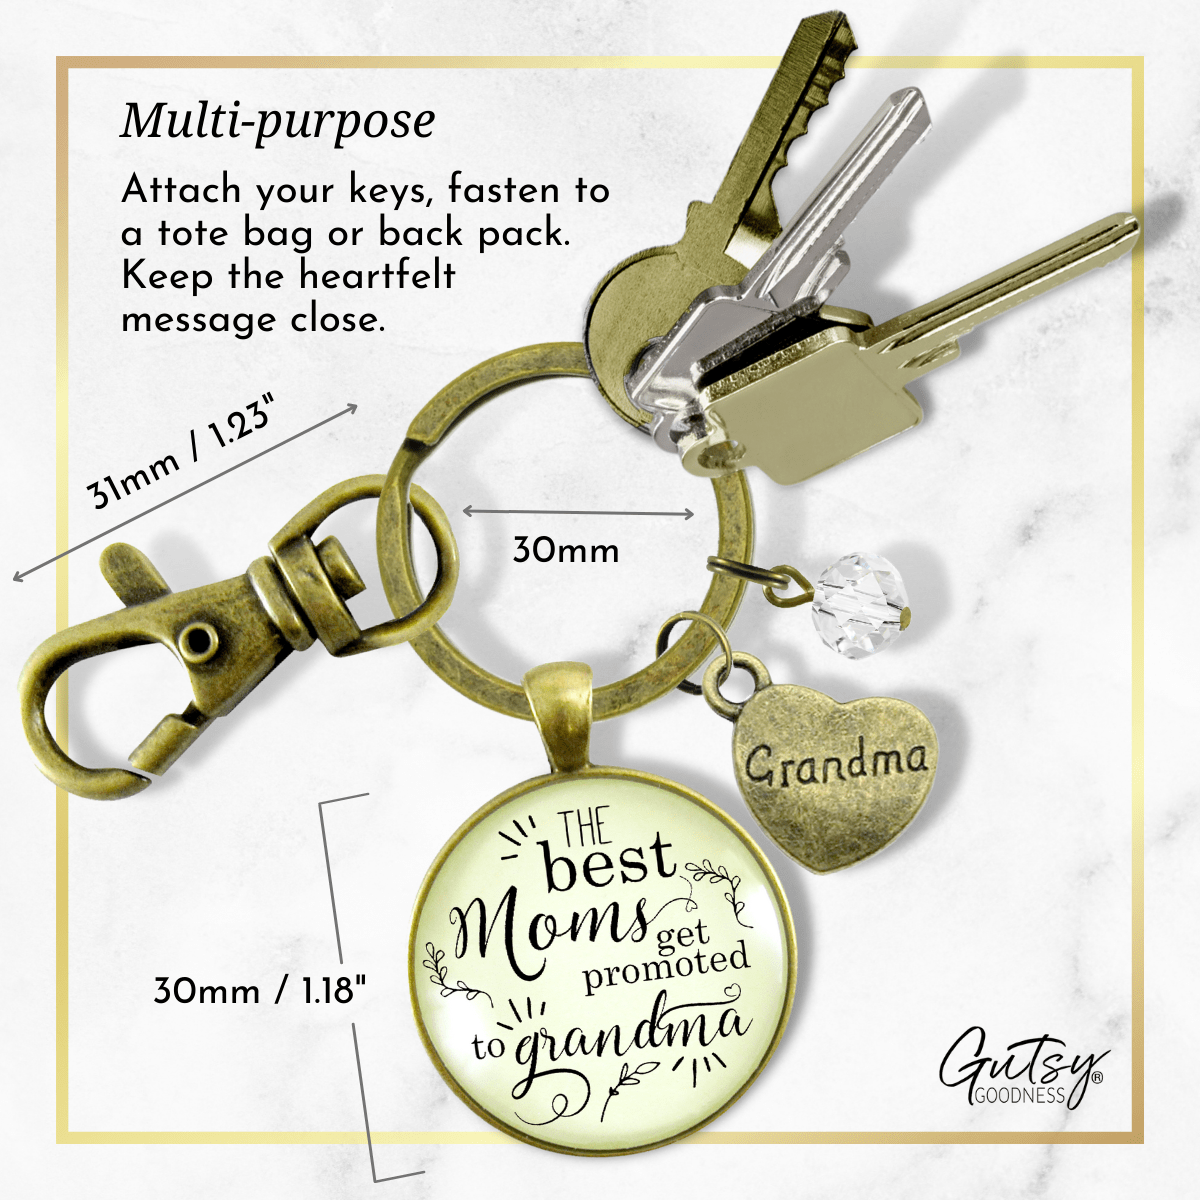 Pregnancy Announcement Grandma Baby Reveal Keychain Best Moms Gift Personalized Jewelry - Gutsy Goodness Handmade Jewelry;Pregnancy Announcement Grandma Baby Reveal Keychain Best Moms Gift Personalized Jewelry - Gutsy Goodness Handmade Jewelry Gifts